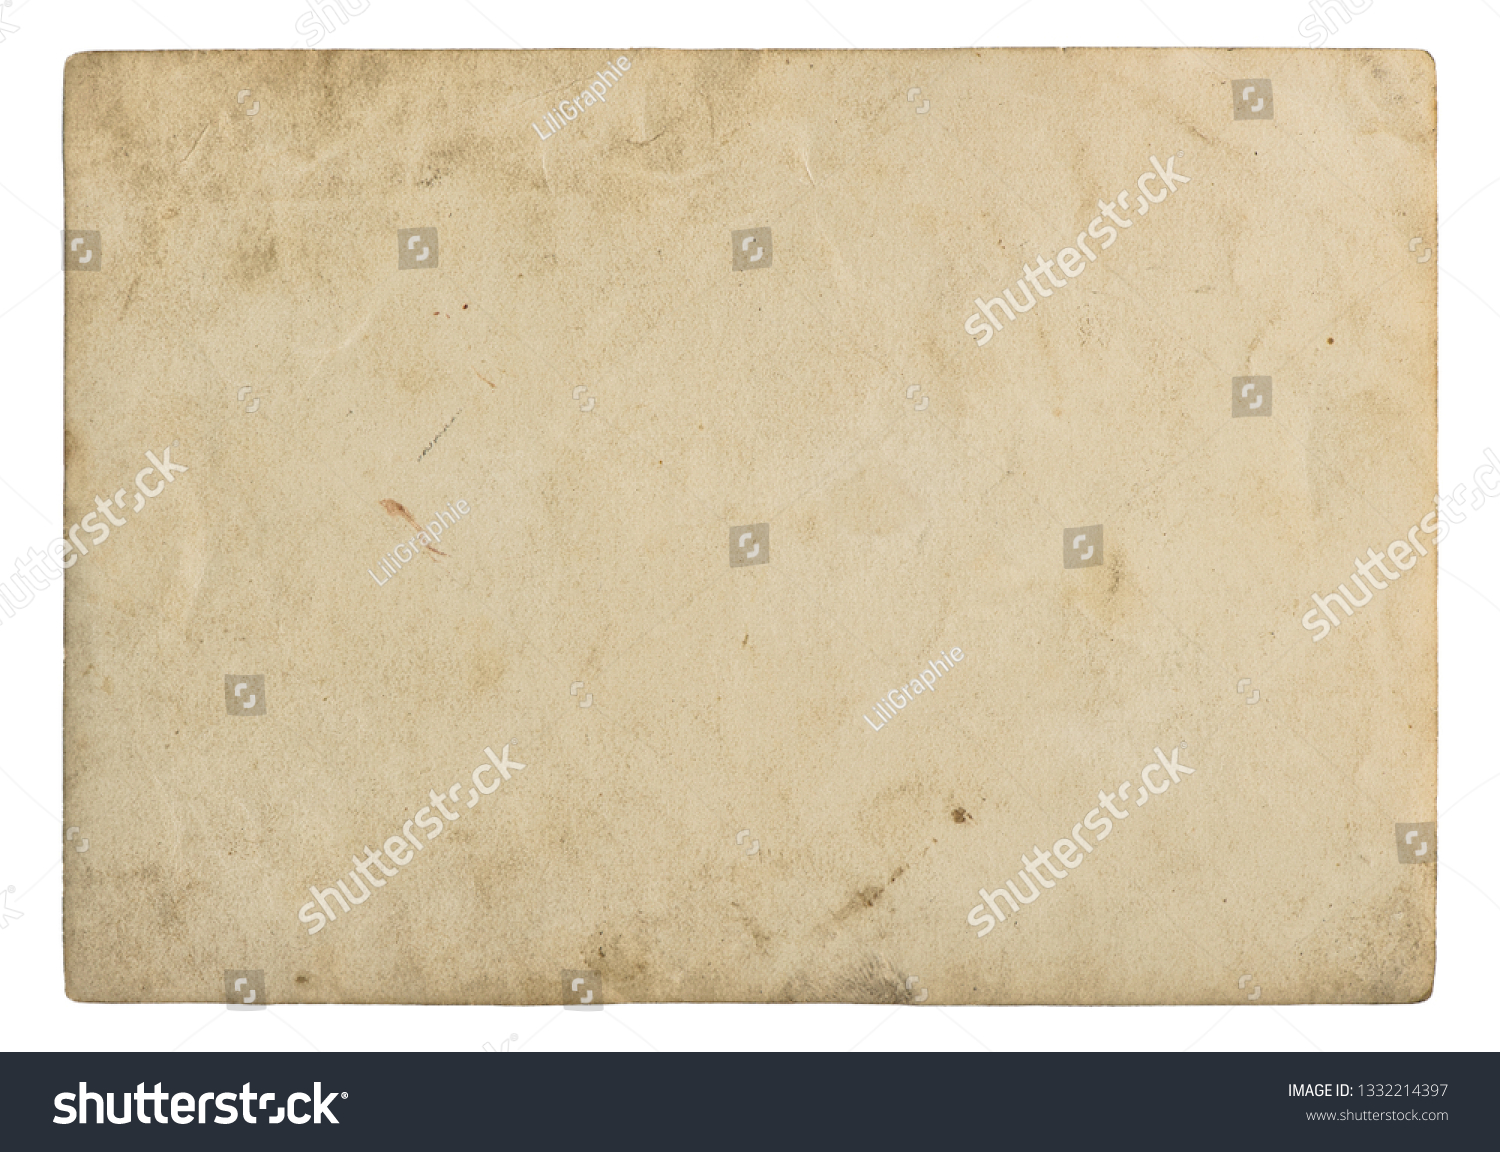 Used paper sheet. Old cardboard with stains isolated on white background #1332214397